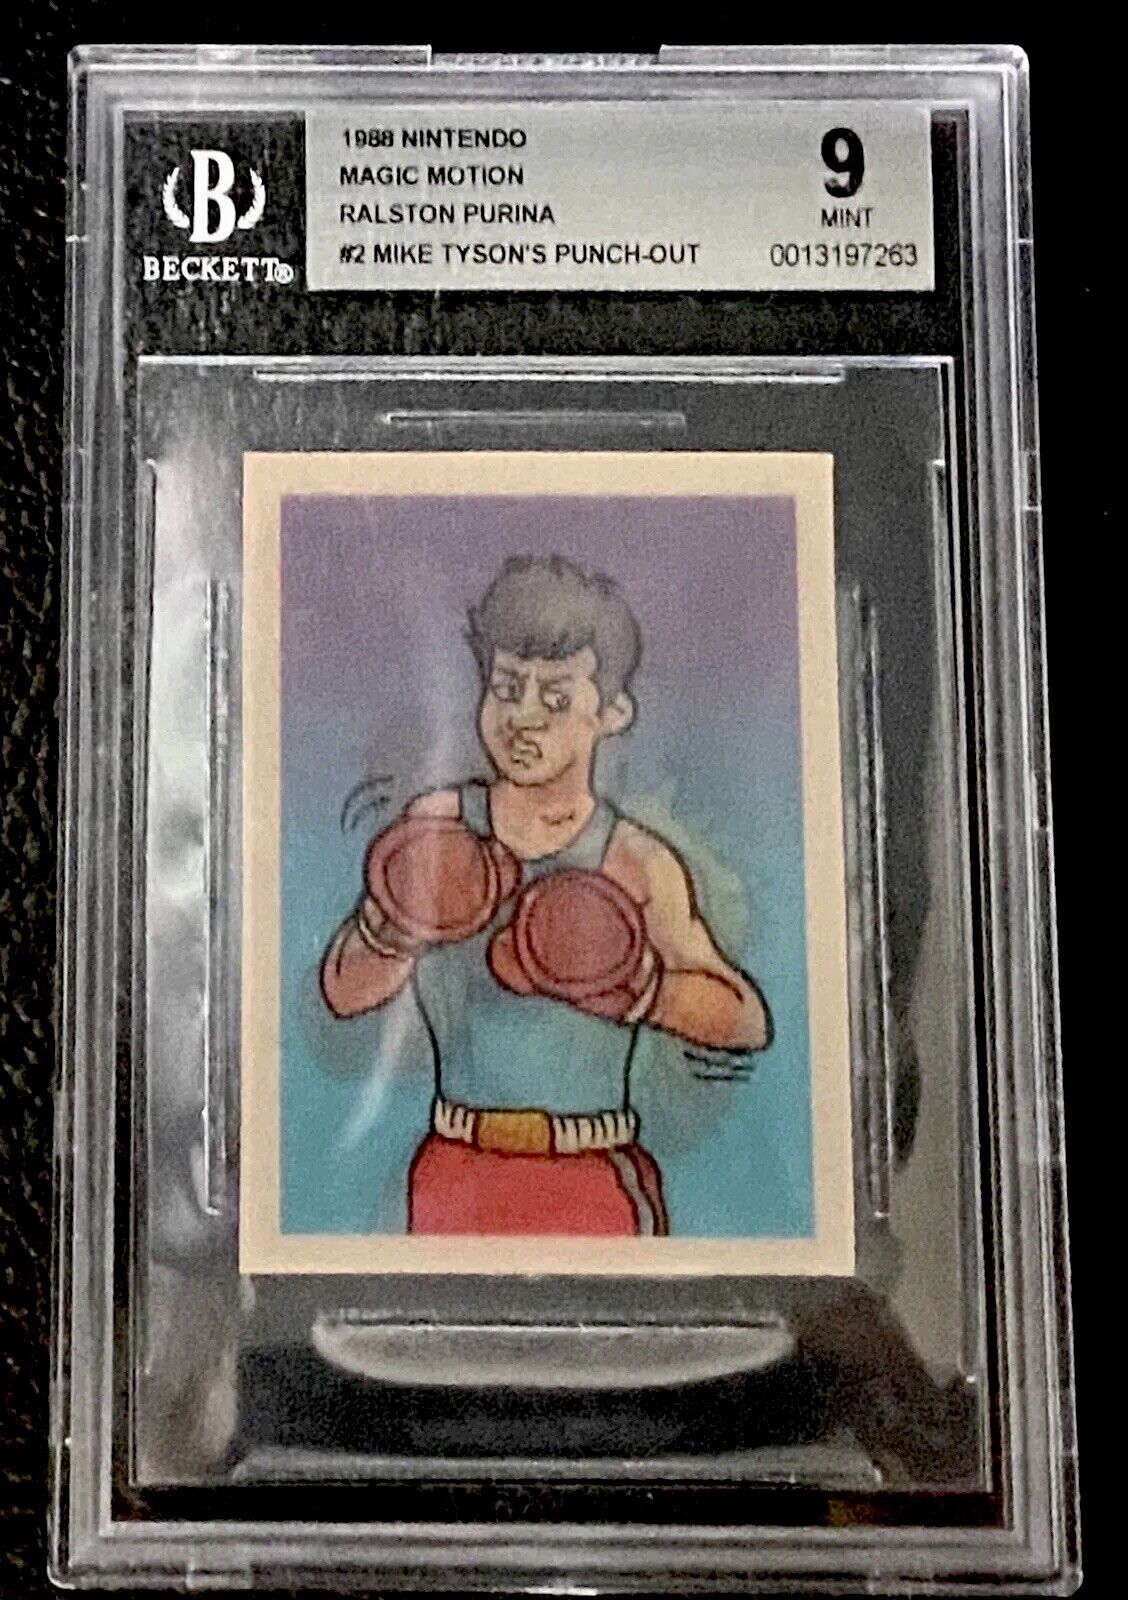 BGS 9 1988 Little Mac Mike Tyson Punch Out Ralston Nintendo Magic Motion Card RC